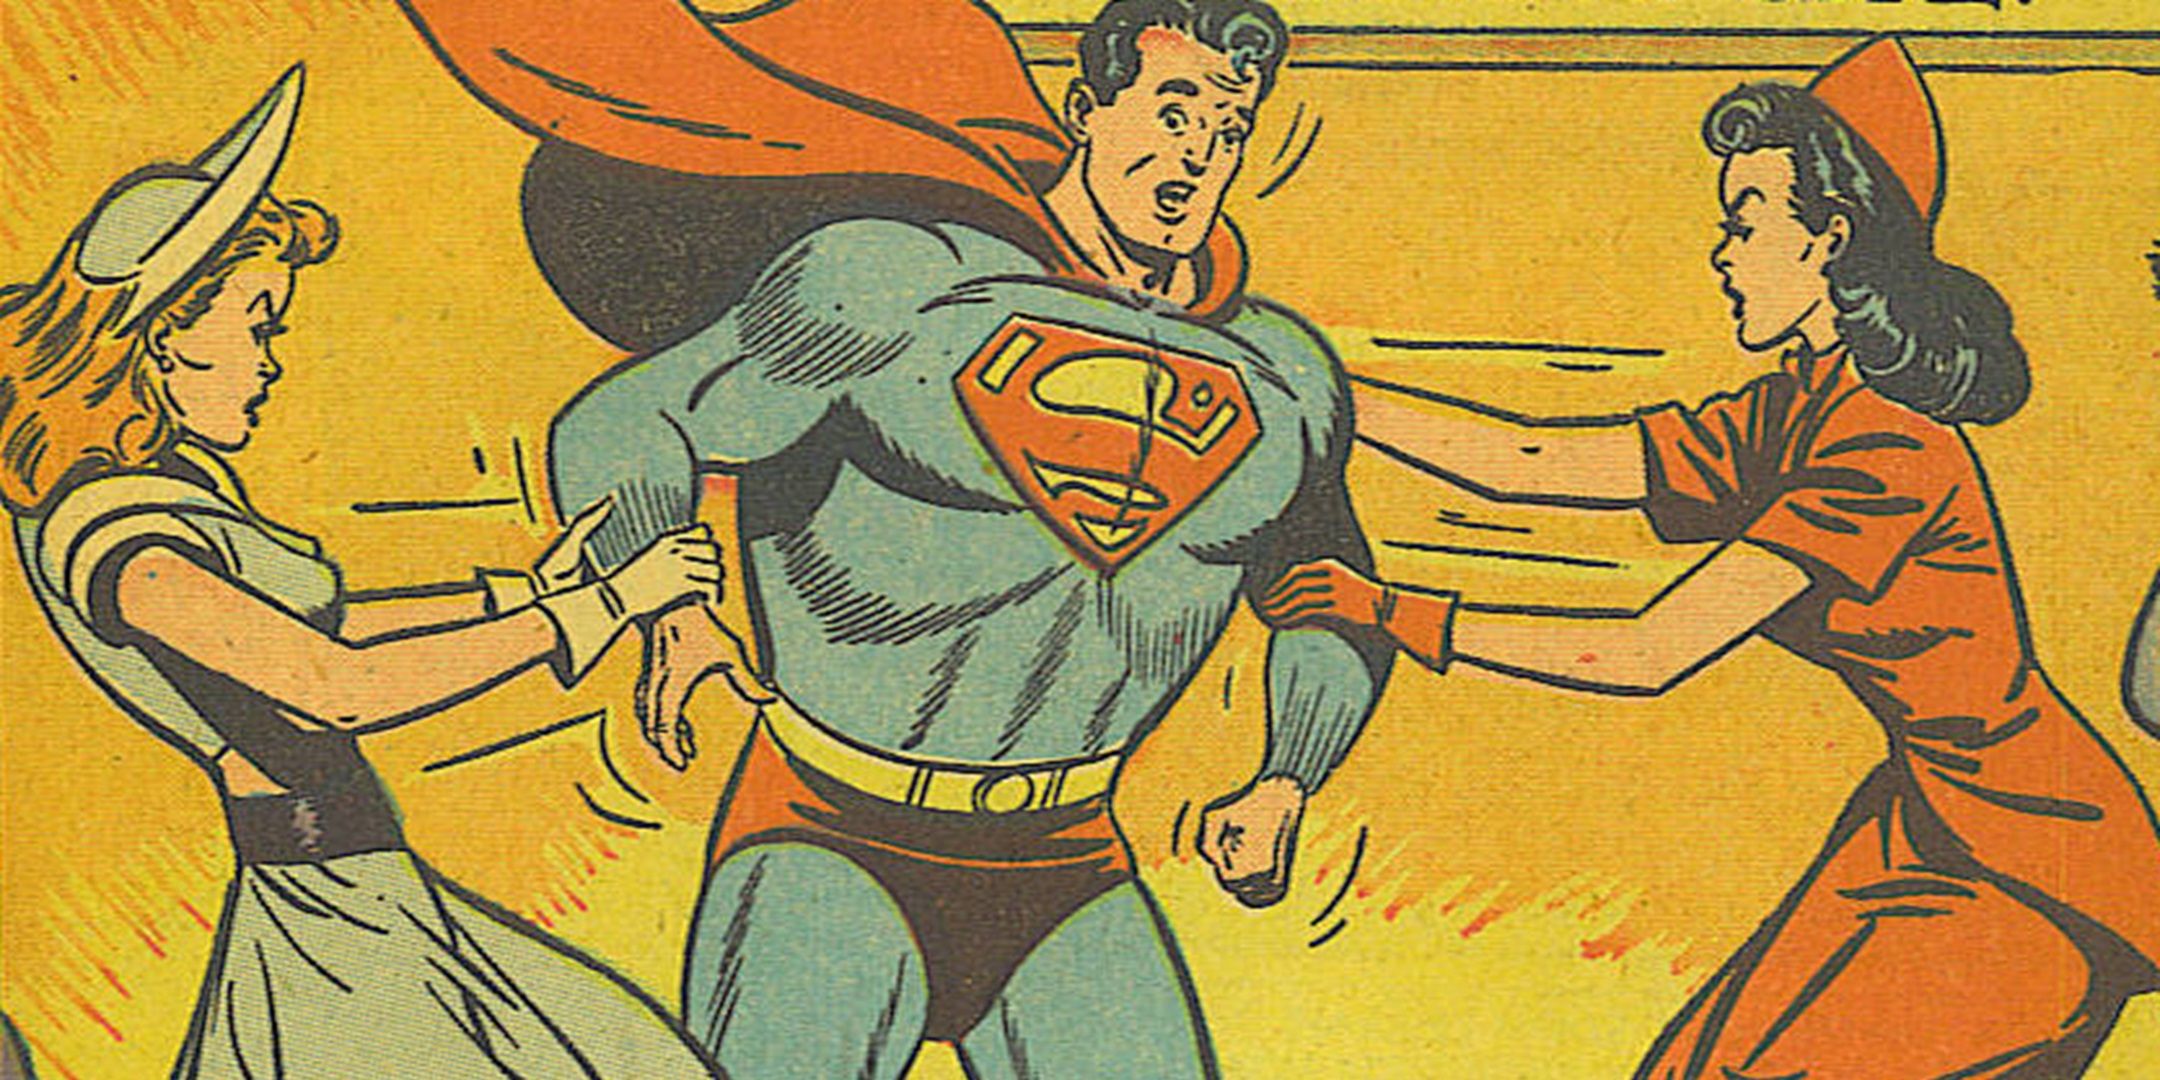 75 Years Ago, Superman Was in a Love Triangle With Lois and...Helen of Troy